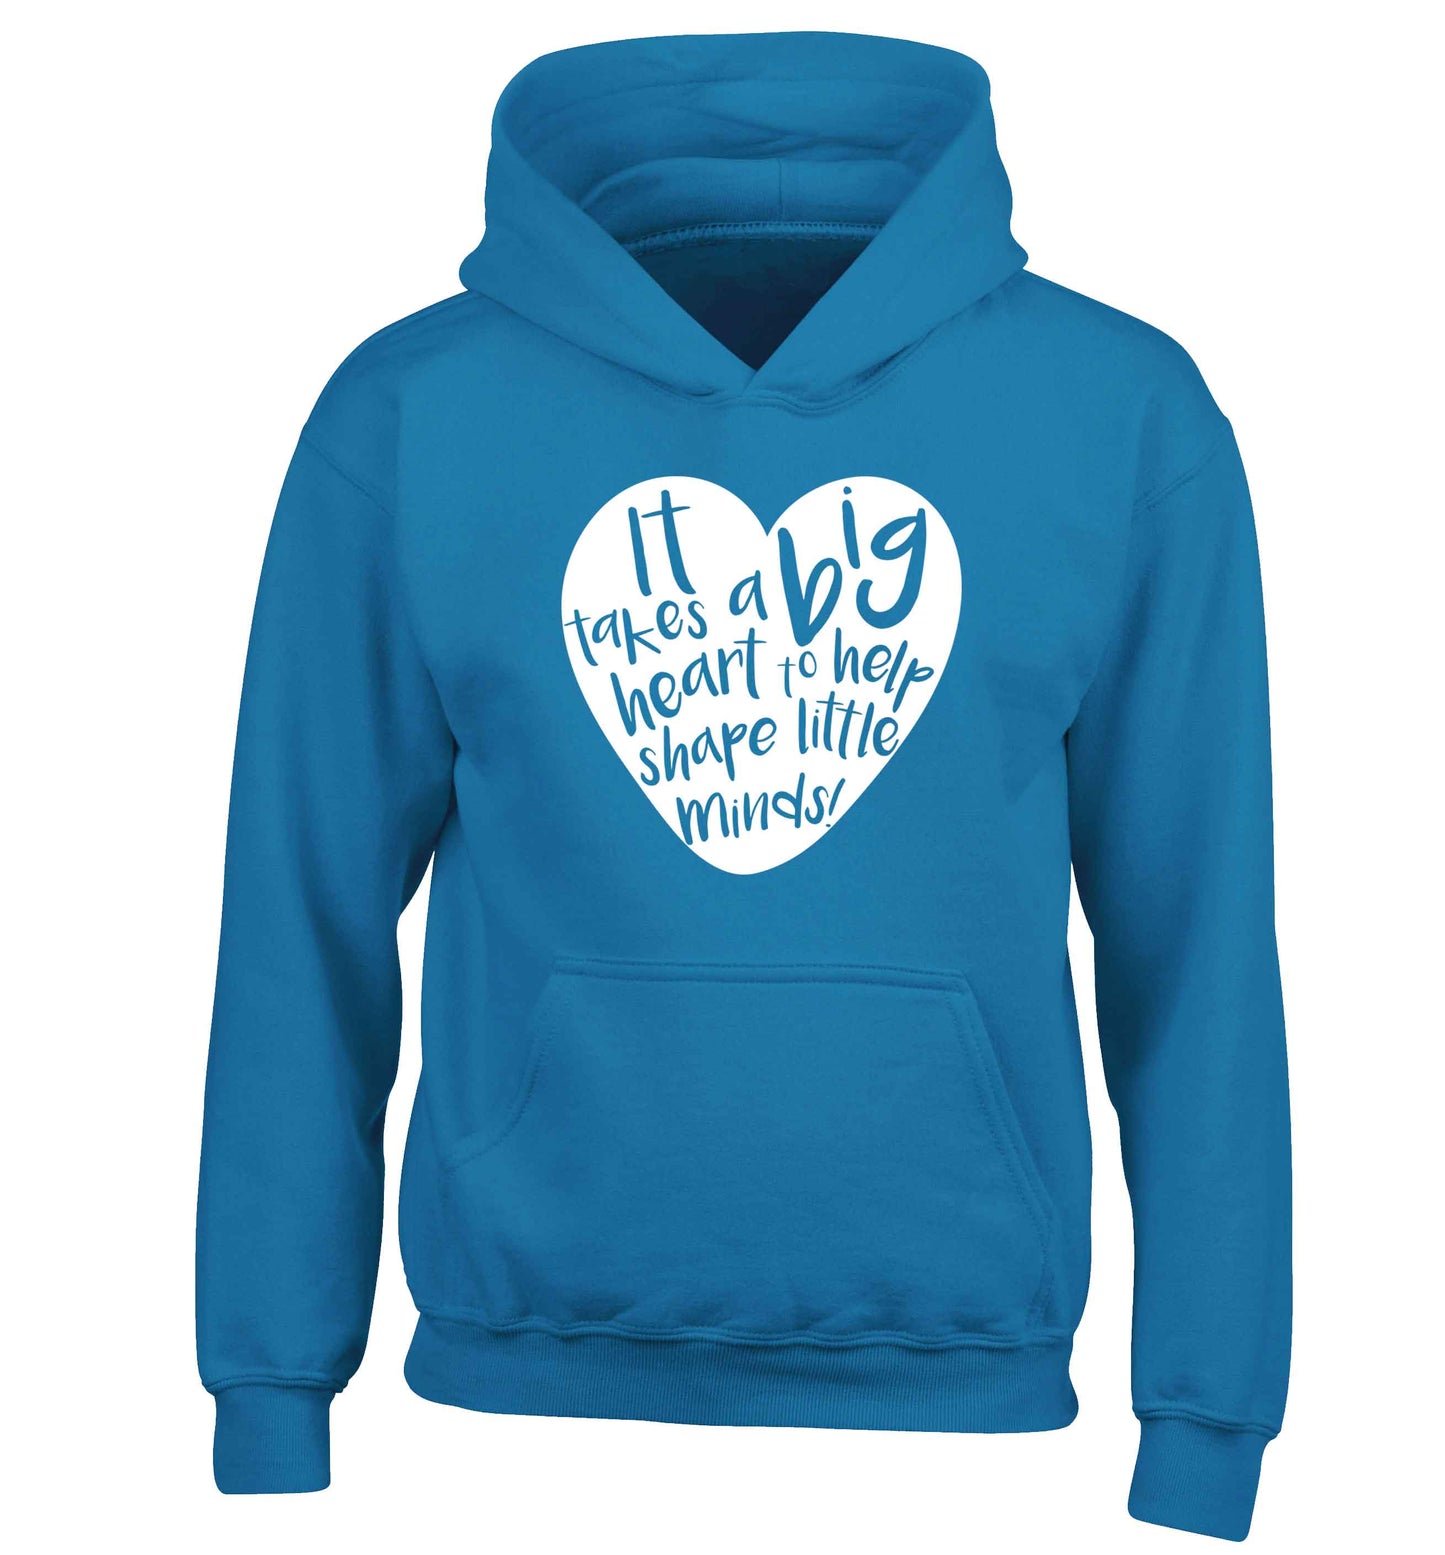 It takes a big heart to help shape little minds children's blue hoodie 12-13 Years